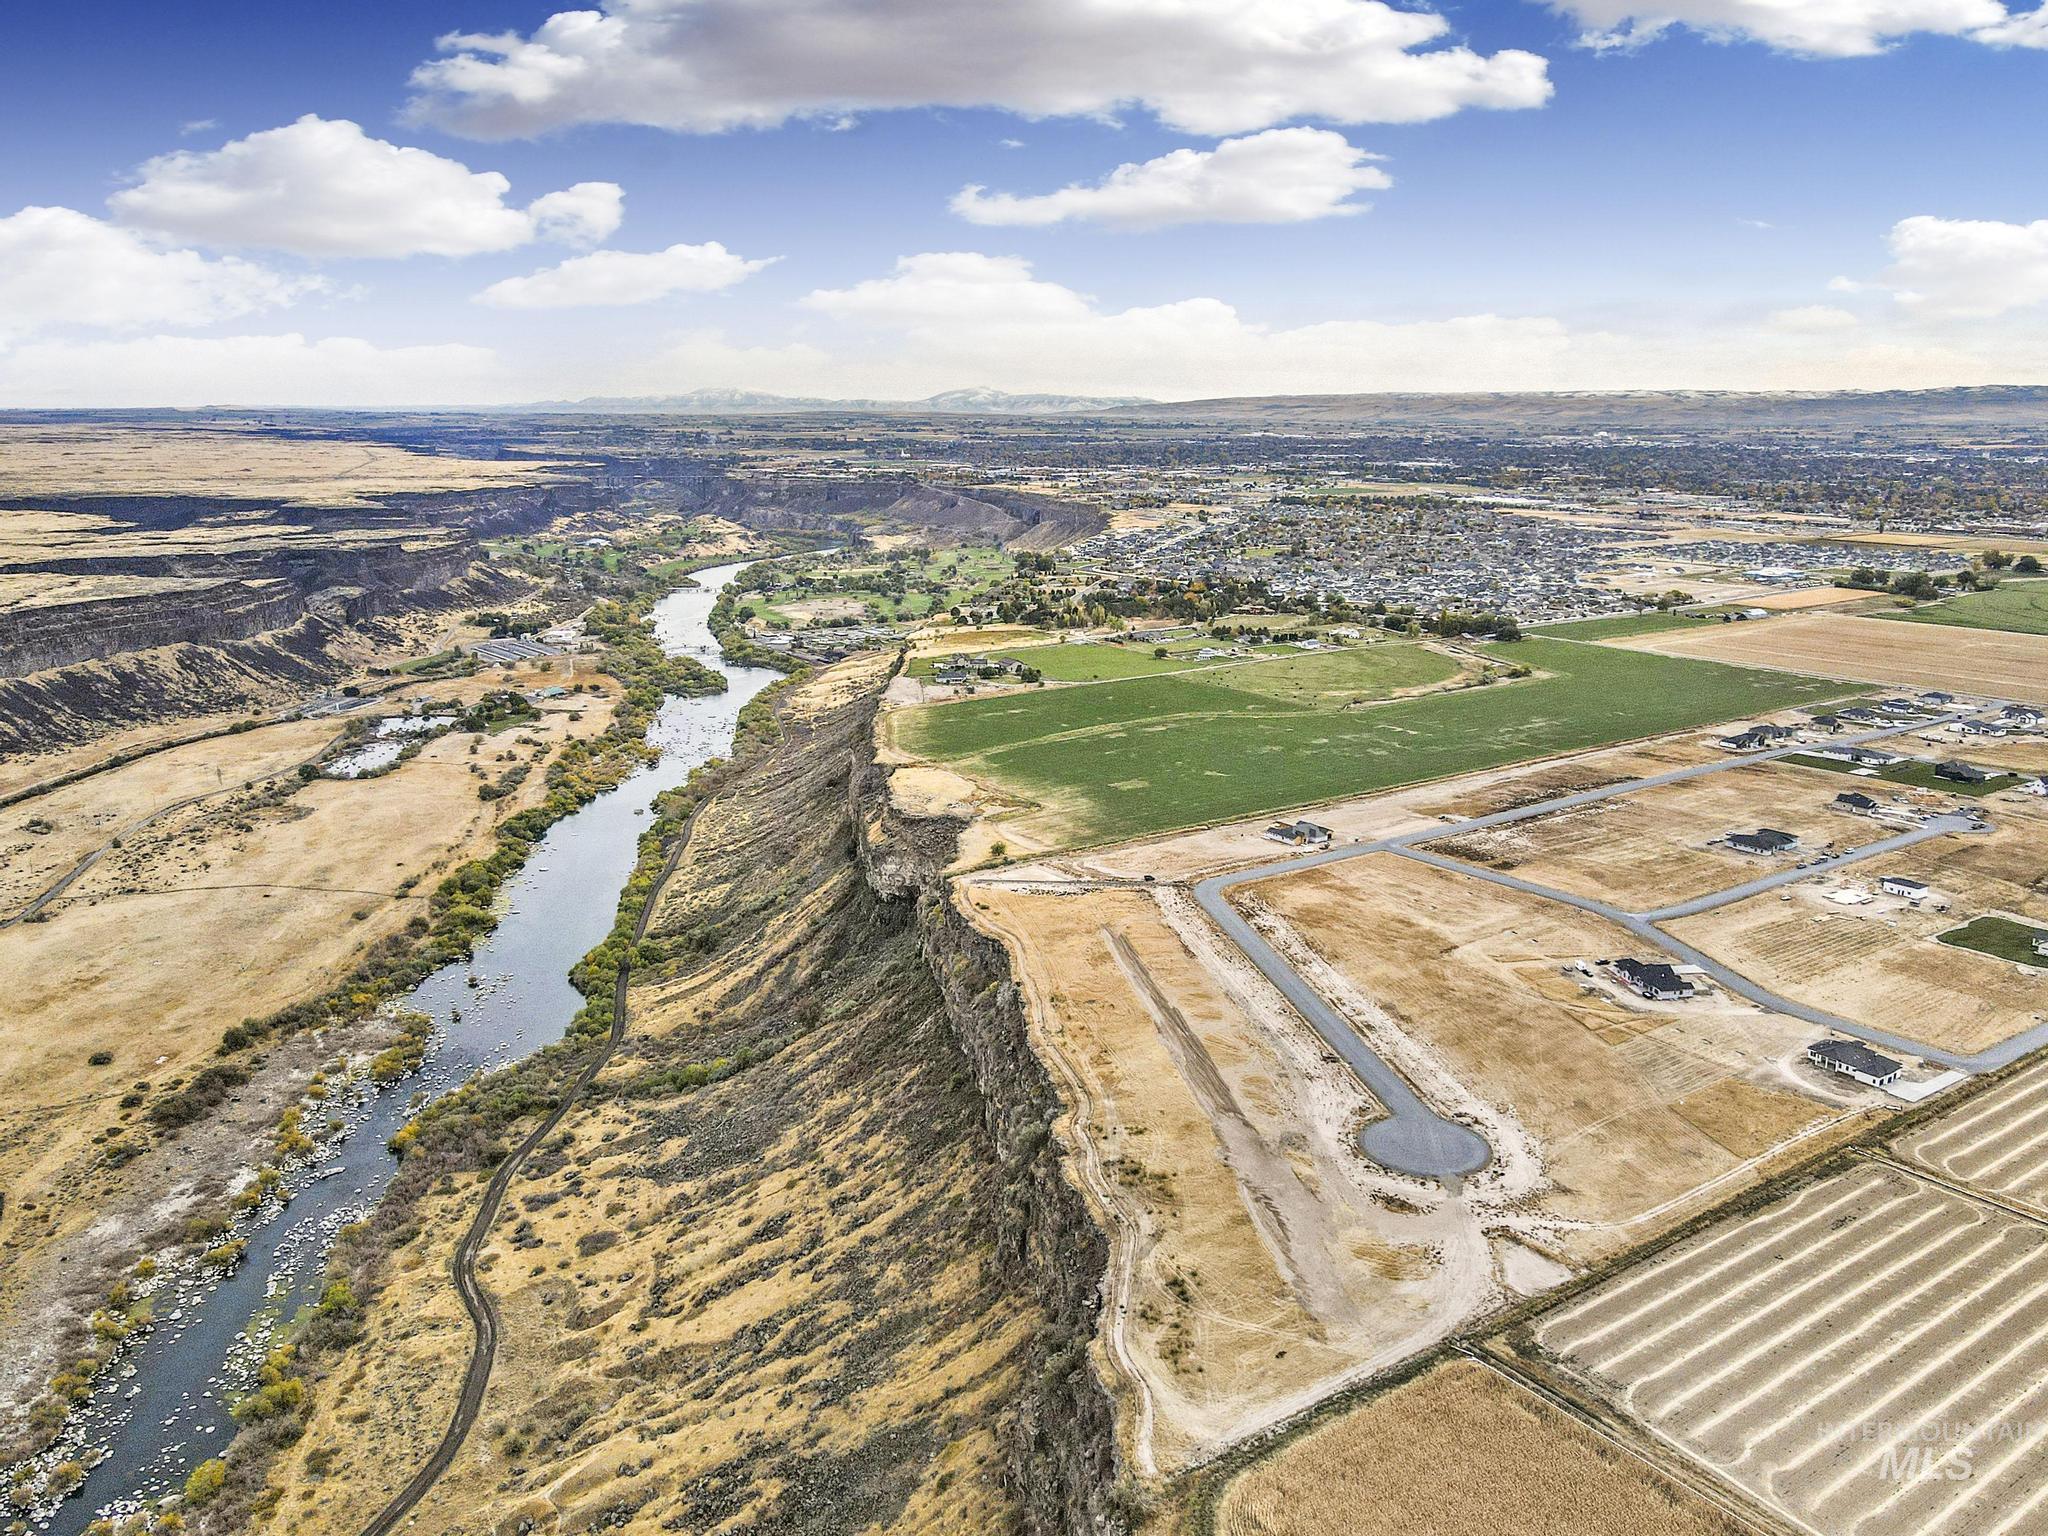 4257 Auger View Dr., Twin Falls, Idaho 83301, Land For Sale, Price $249,000, 98868537